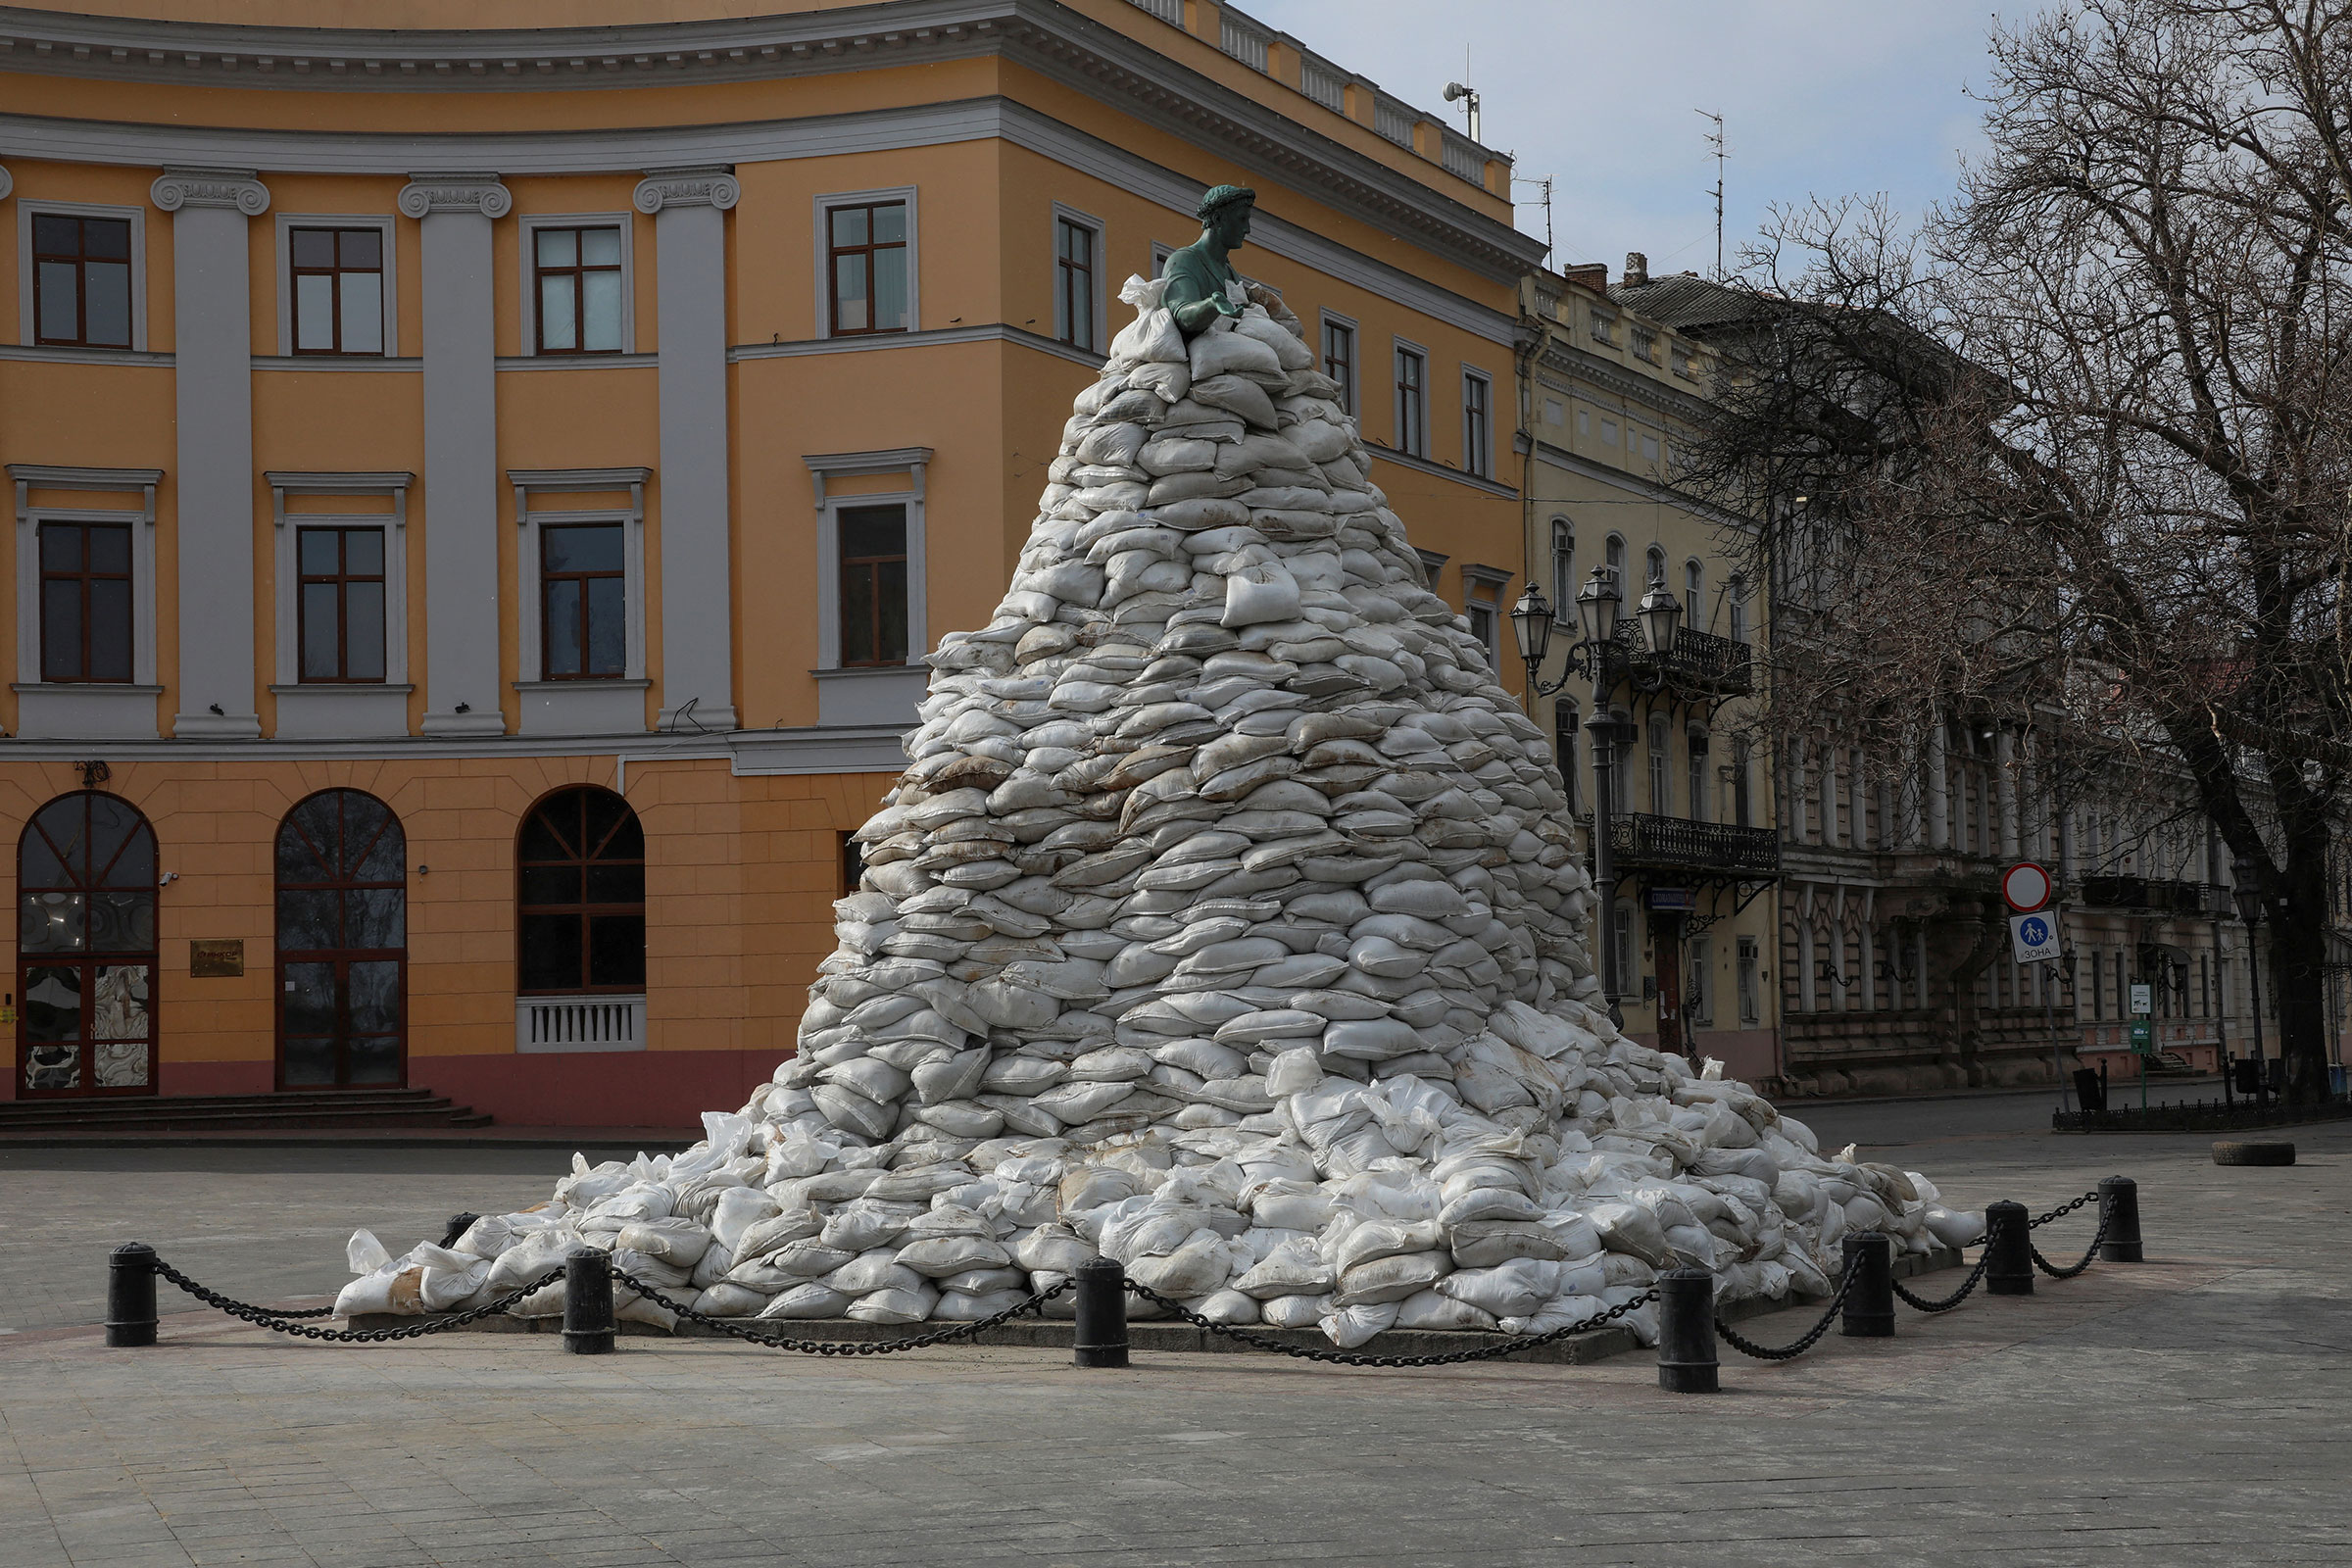 A monument of the city founder Duke de Richelieu is seen covered with sand bags for protection, amid Russia's invasion of Ukraine, in central Odessa on March 9.